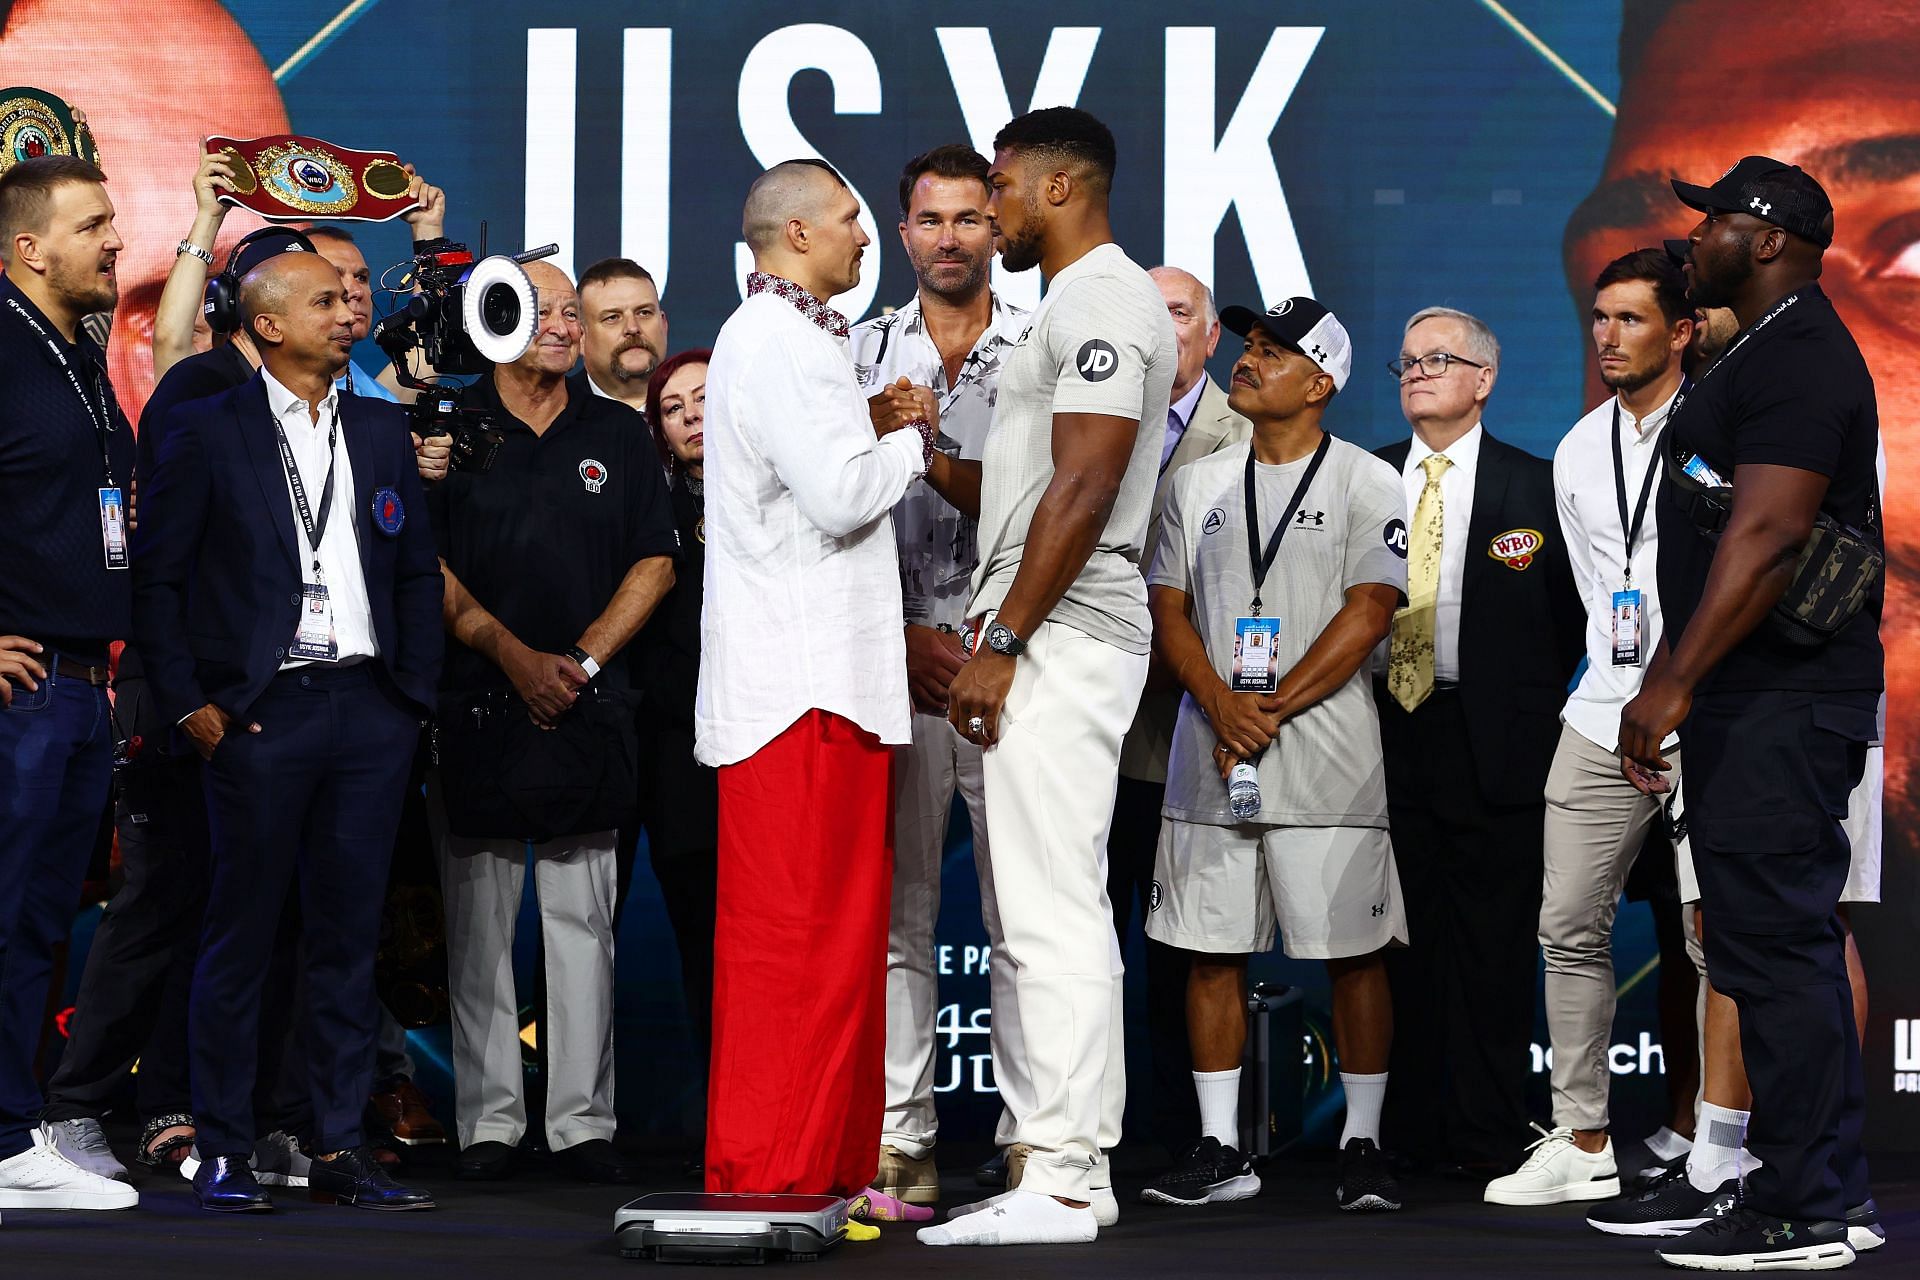 Oleksandr Usyk vs. Anthony Joshua 2 - Weigh-In face off